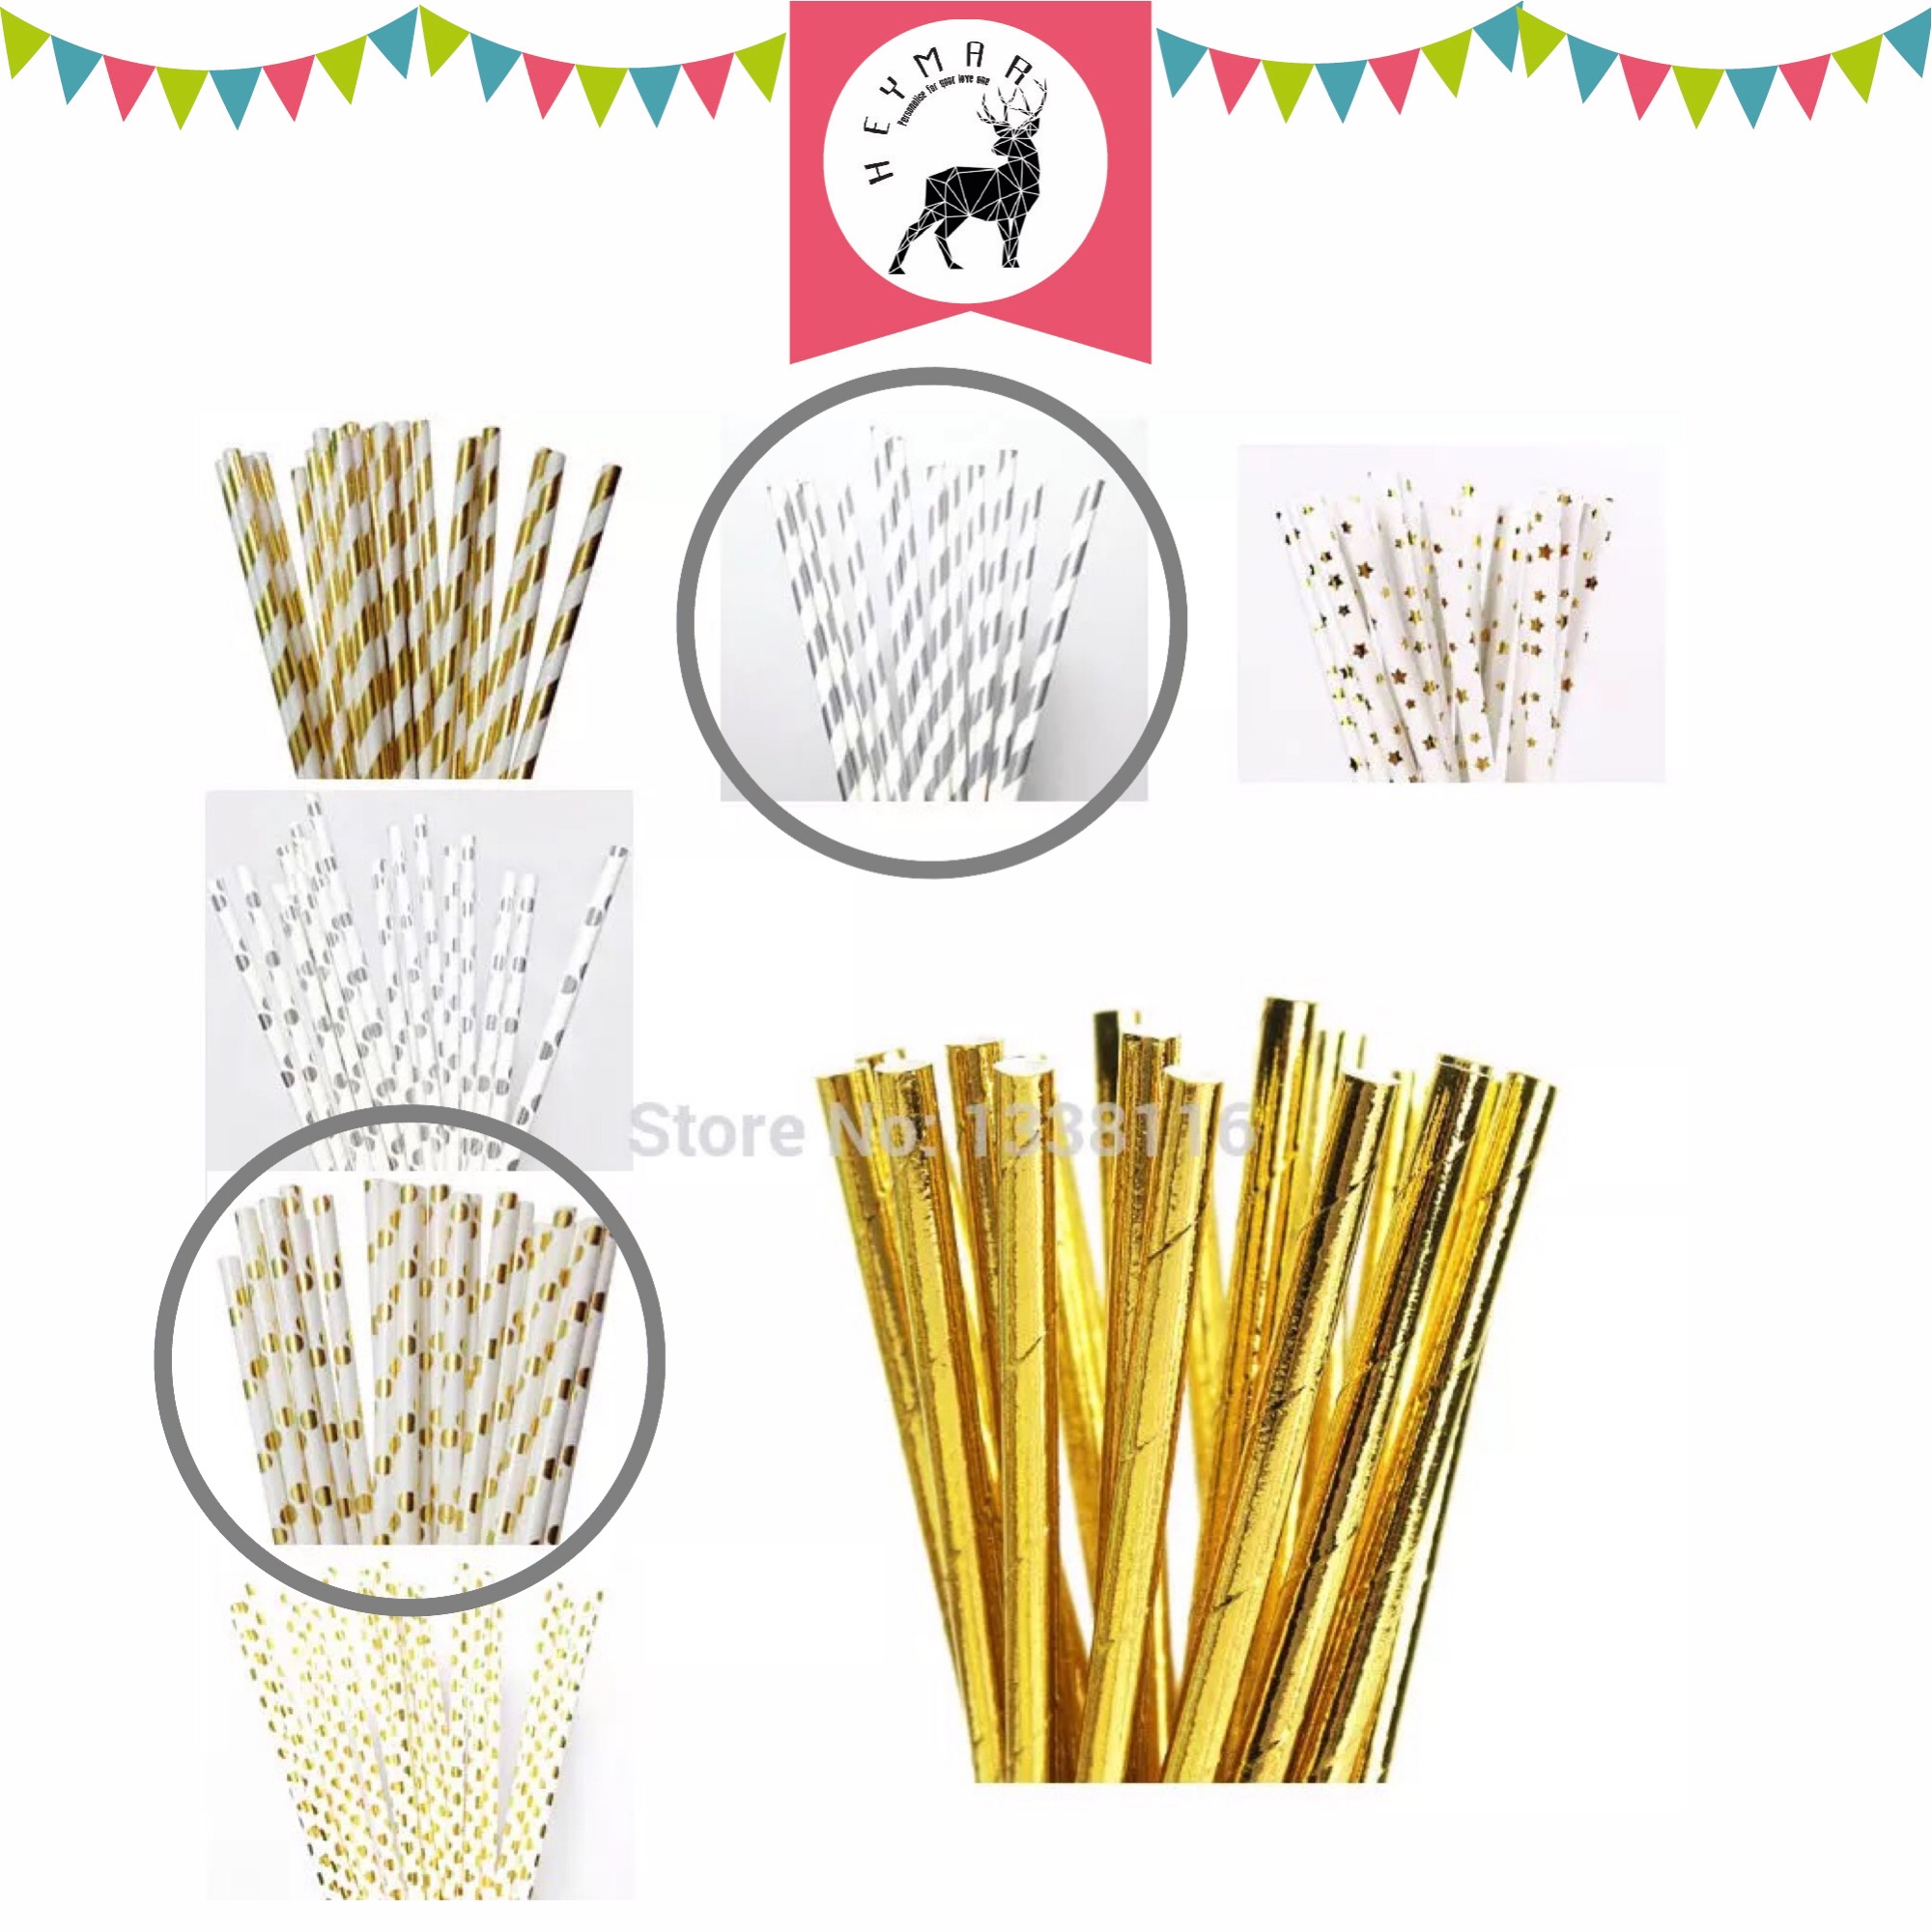 PARTY BOX disposable paper straws eco friendly